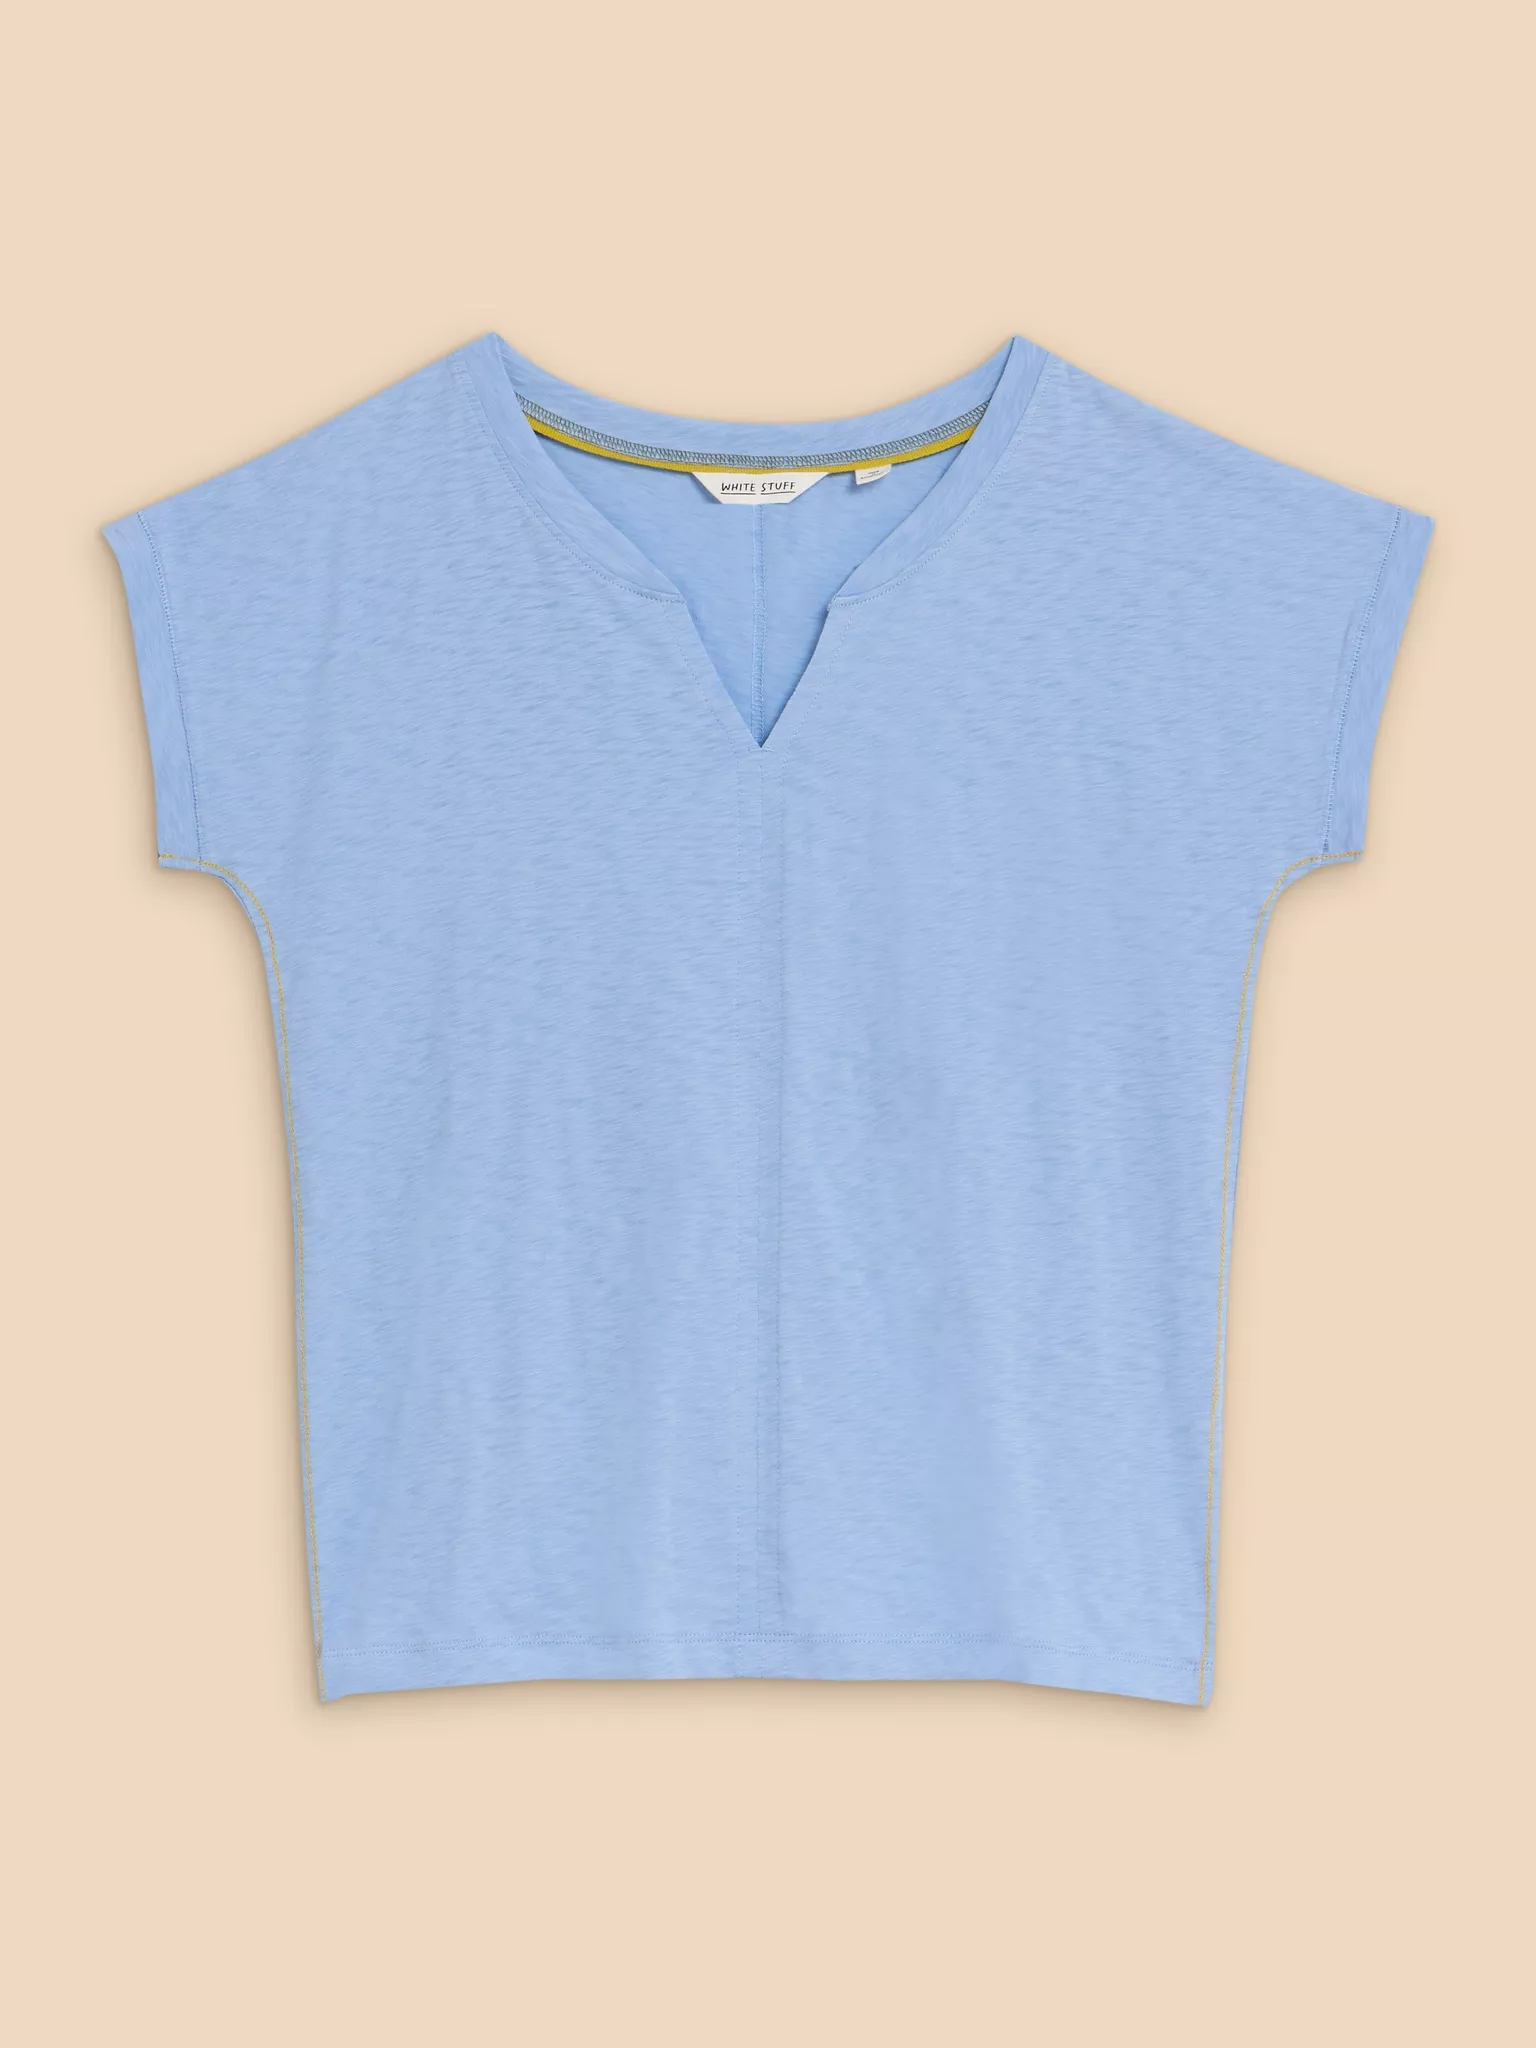 White Stuff Nelly Notch Neck Tee - Light Blue Clothing - Tops - Shirts - SS Knits by White Stuff | Grace the Boutique